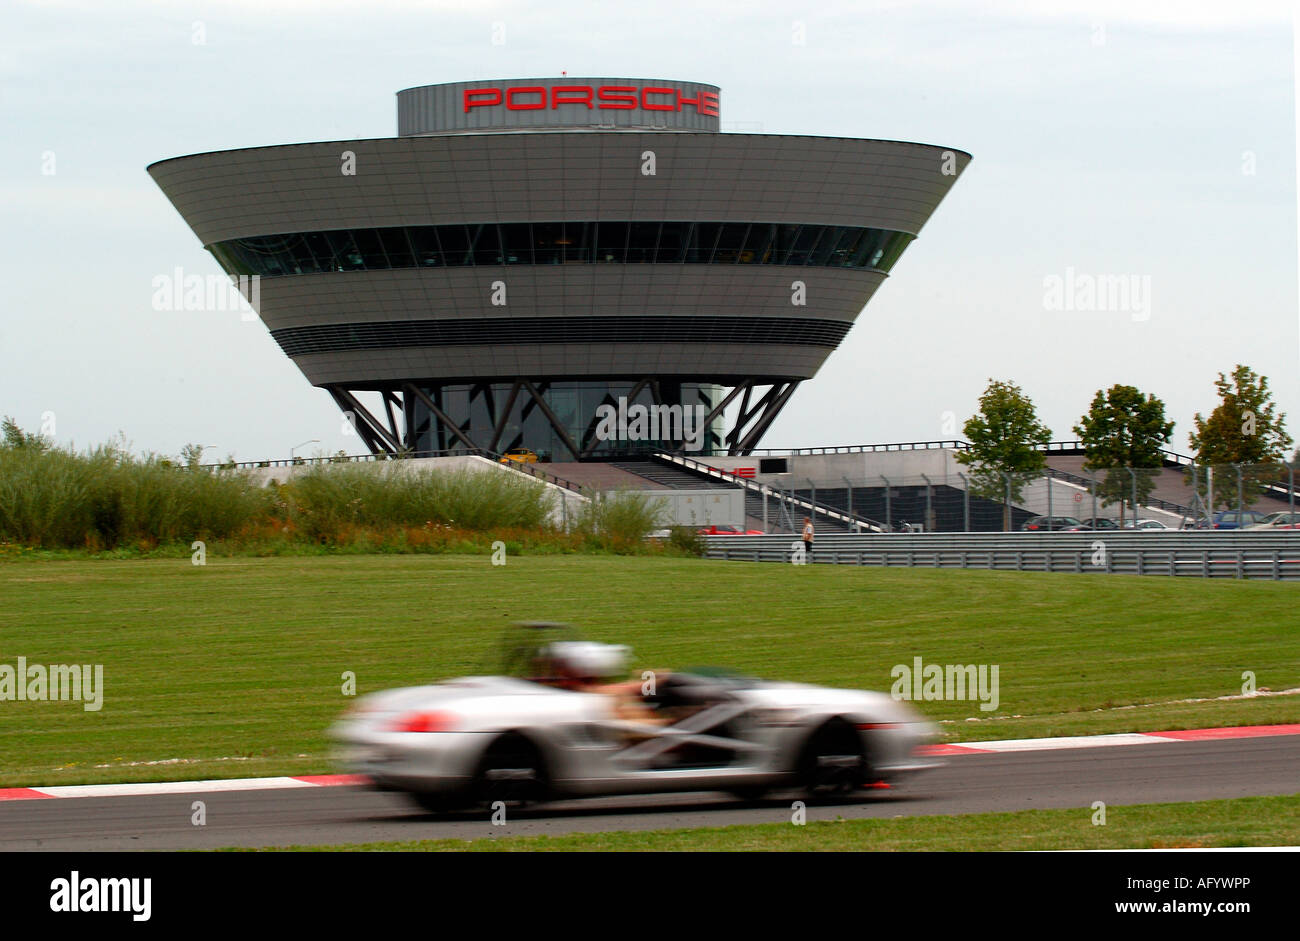 Porsche customer service building and test track, Leipzig, Germany Stock Photo